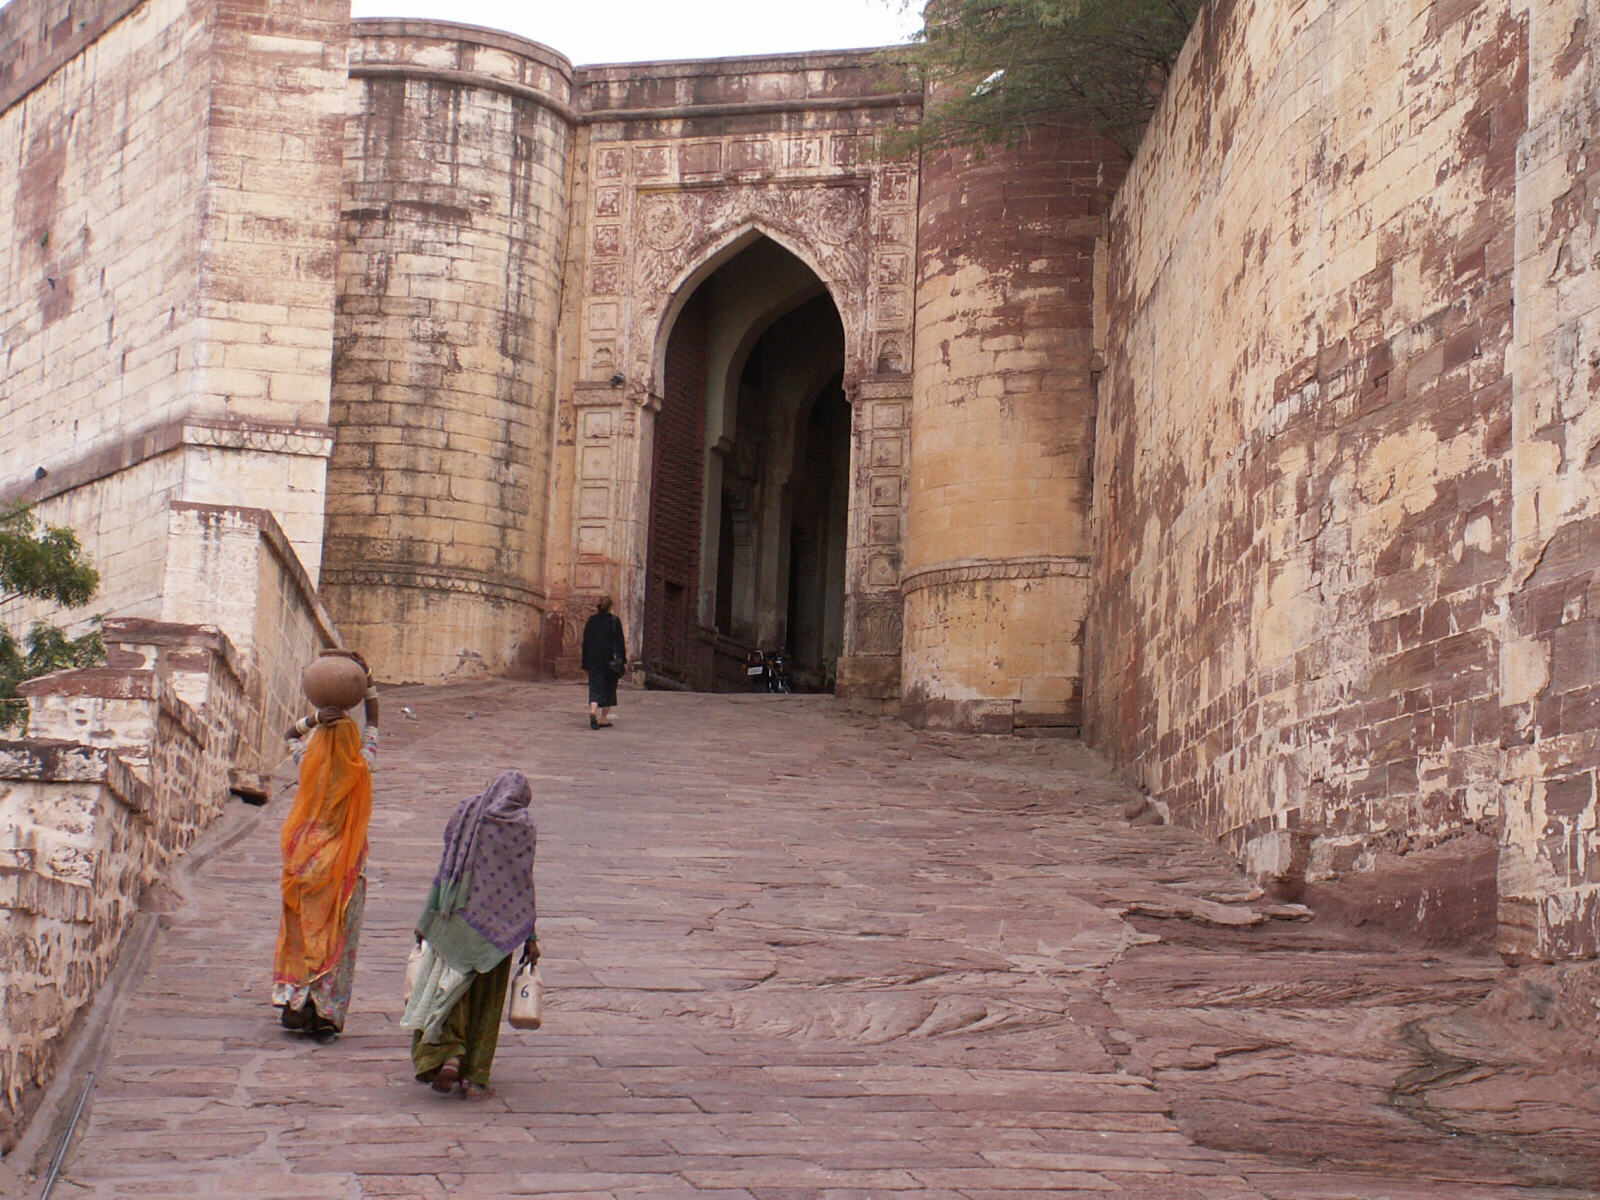 Gateway to the fort in Jodhpur, Rajasthan